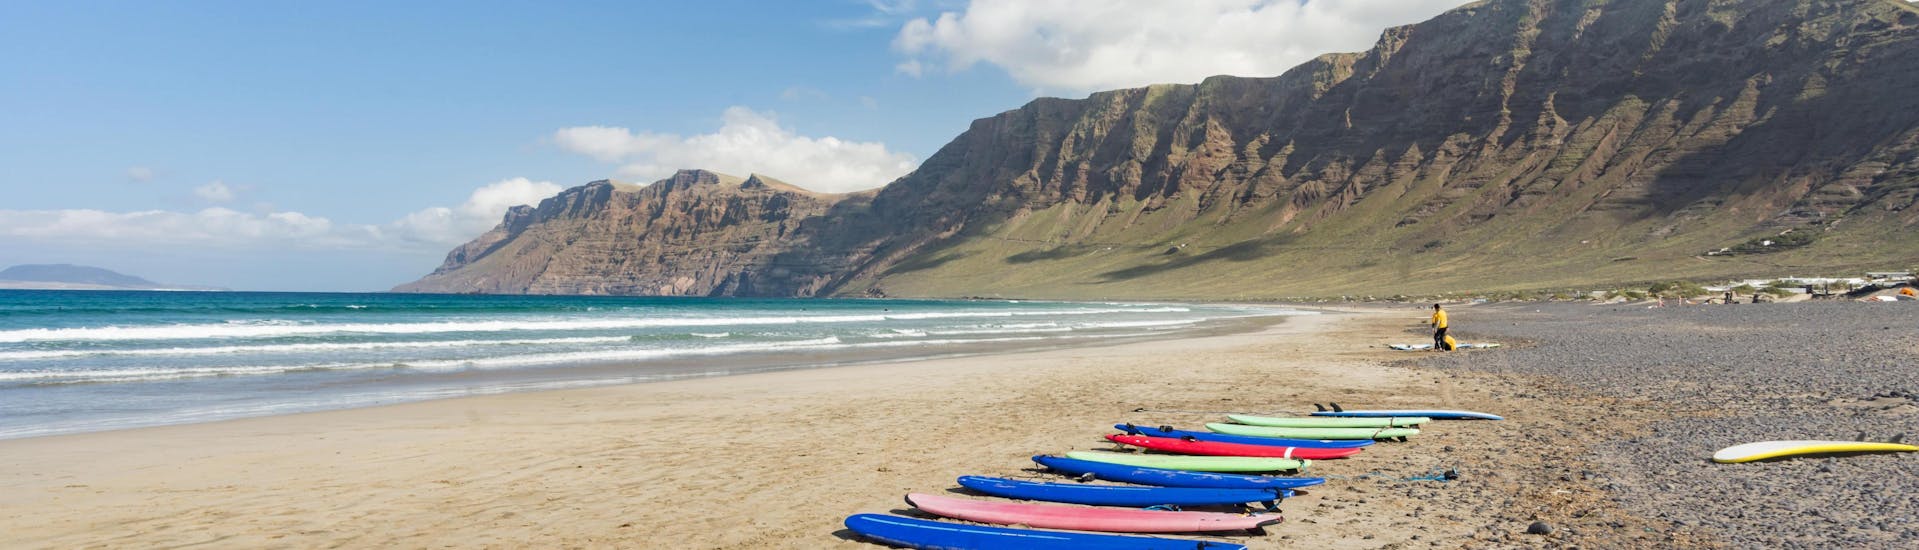 A set of surf boards is lined up on the beach for people to go surfing in Lanzarote.